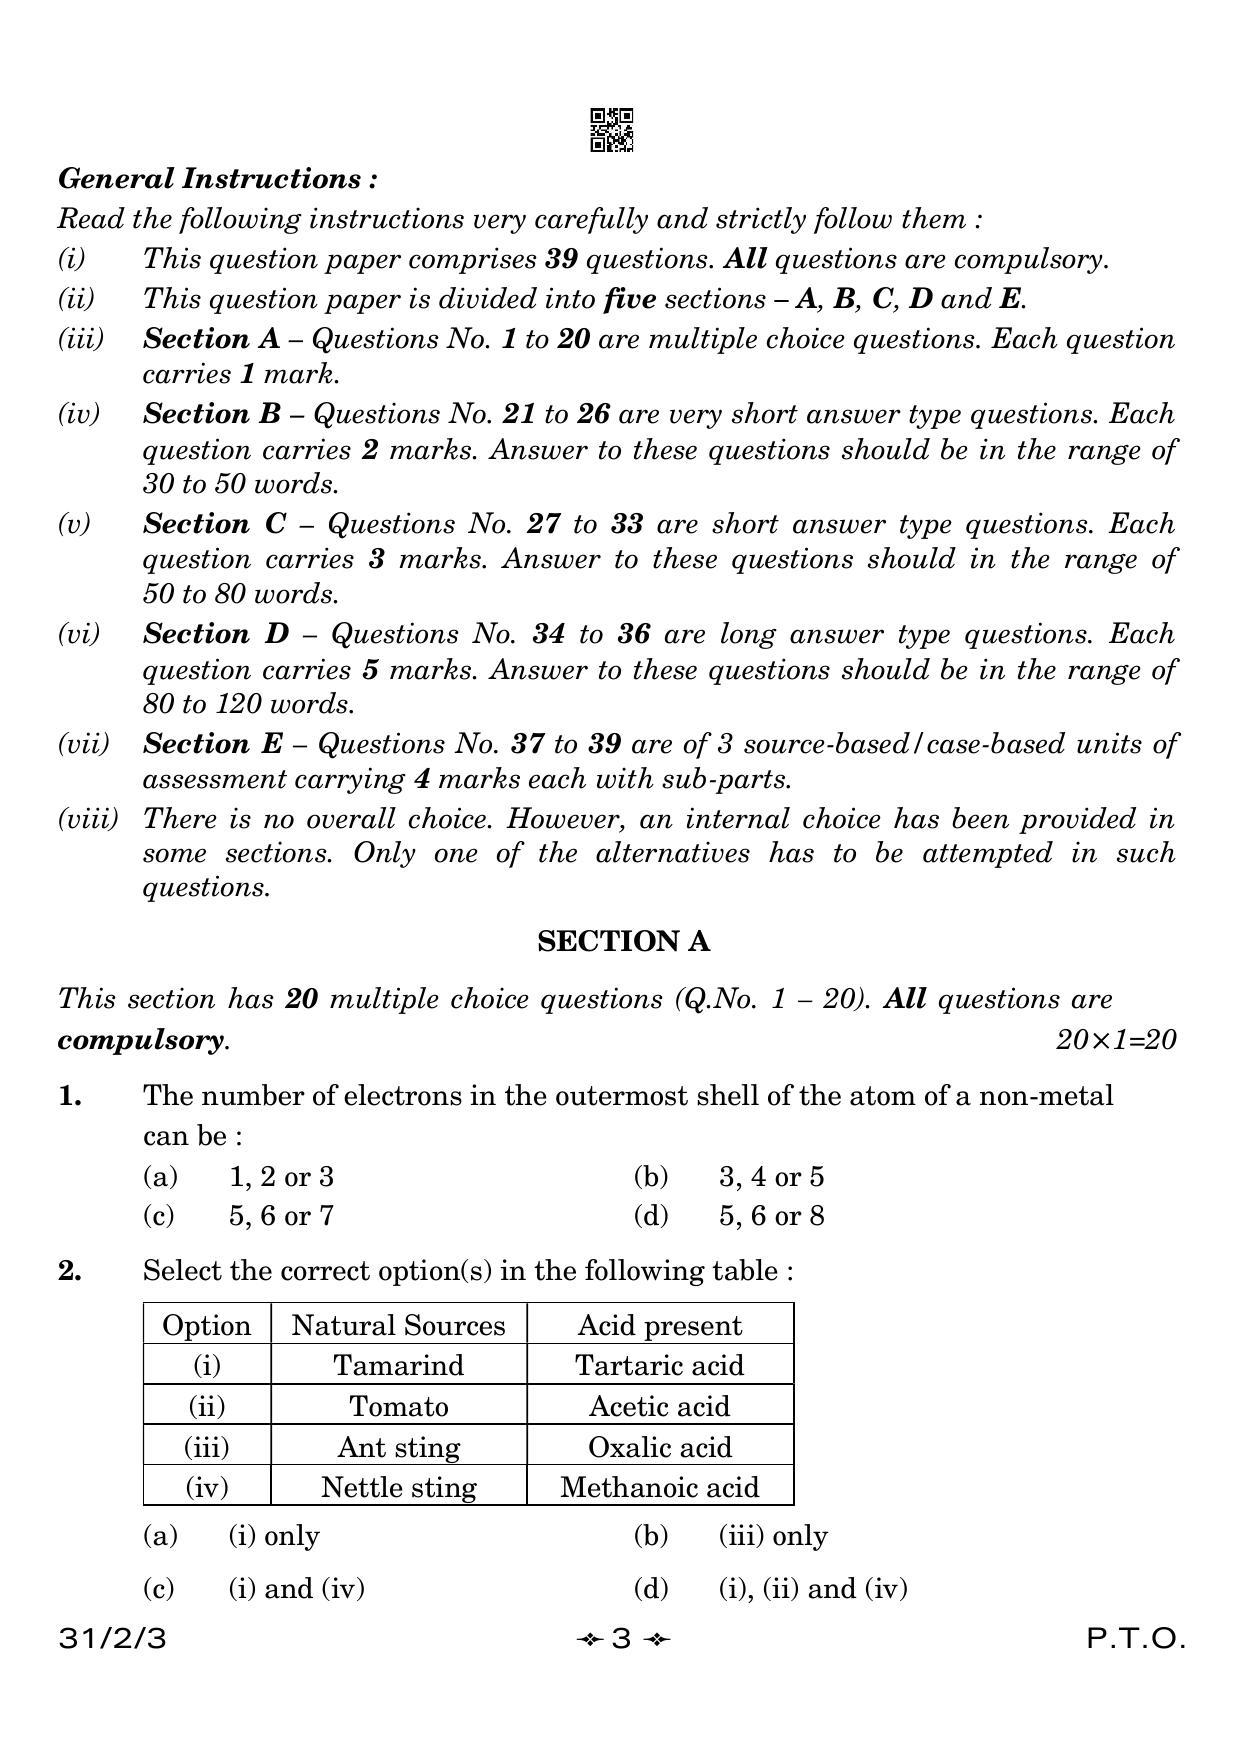 CBSE Class 10 31-2-3 Science 2023 Question Paper - Page 3